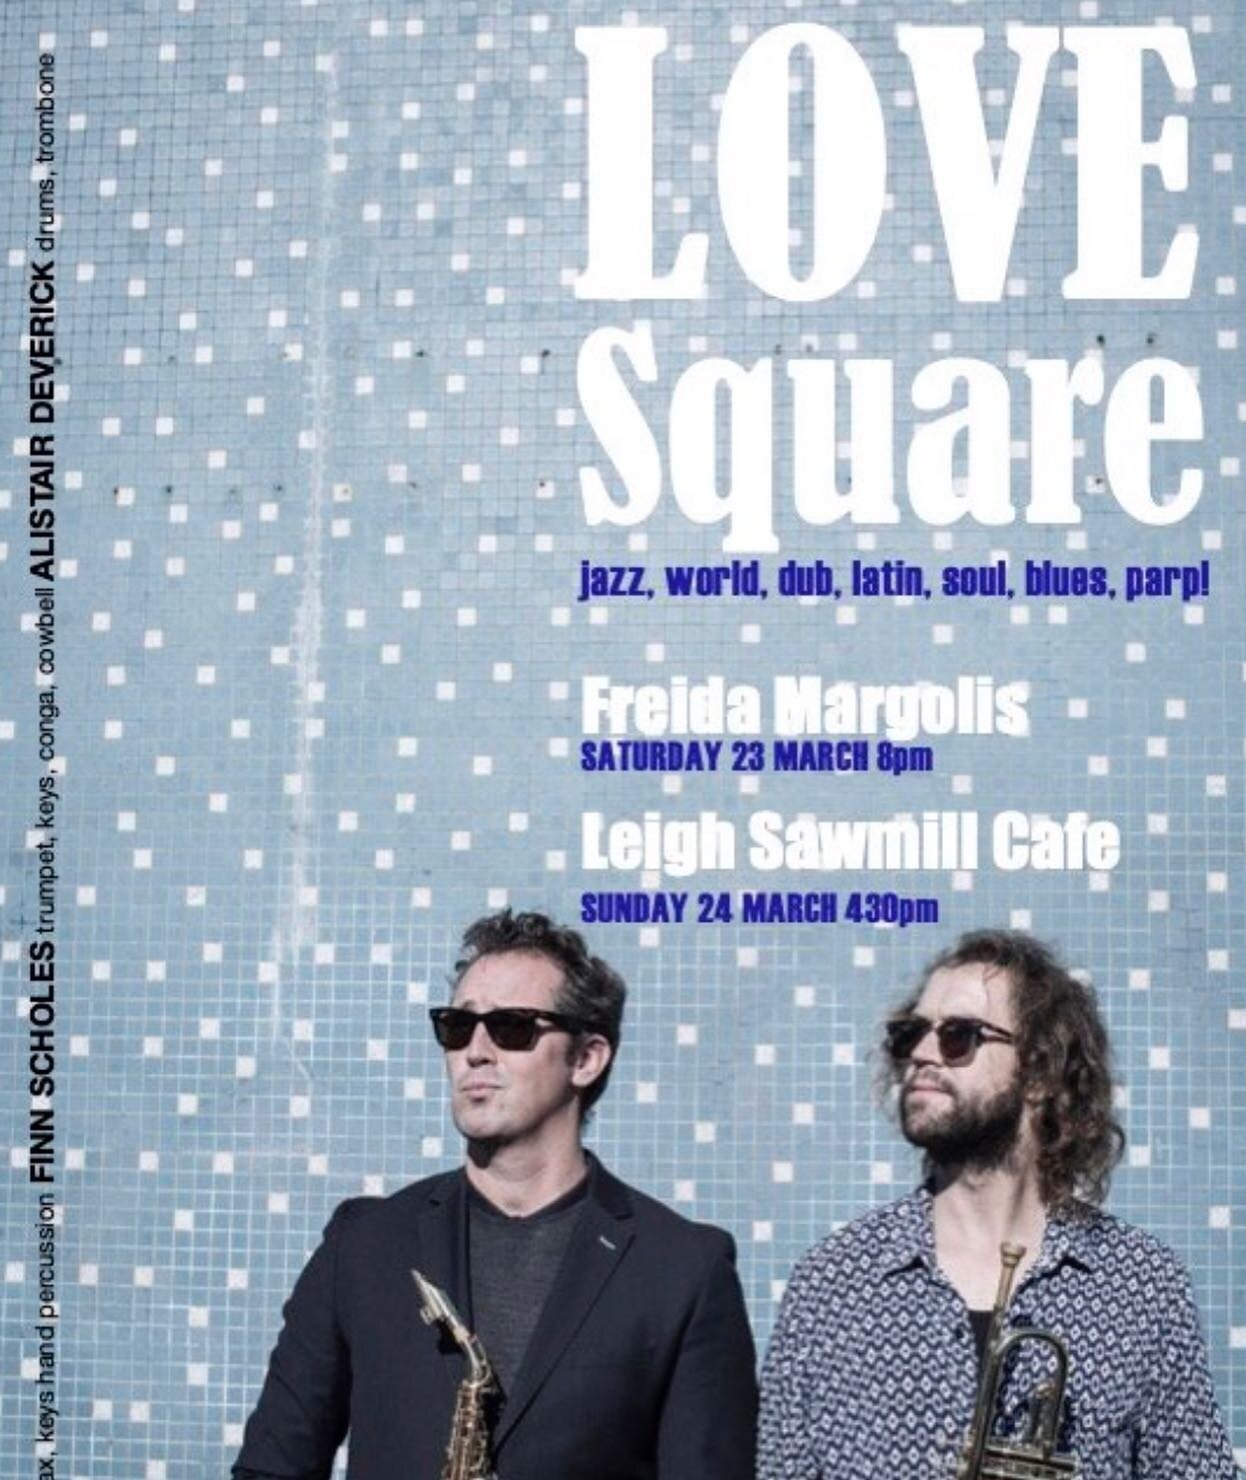 SUNDAY JAZZ IS BACK thanks to LOVE SQUARED. From 4:30 this afternoon, family friendly, $29 from @undertheradarnz. Door sales available.